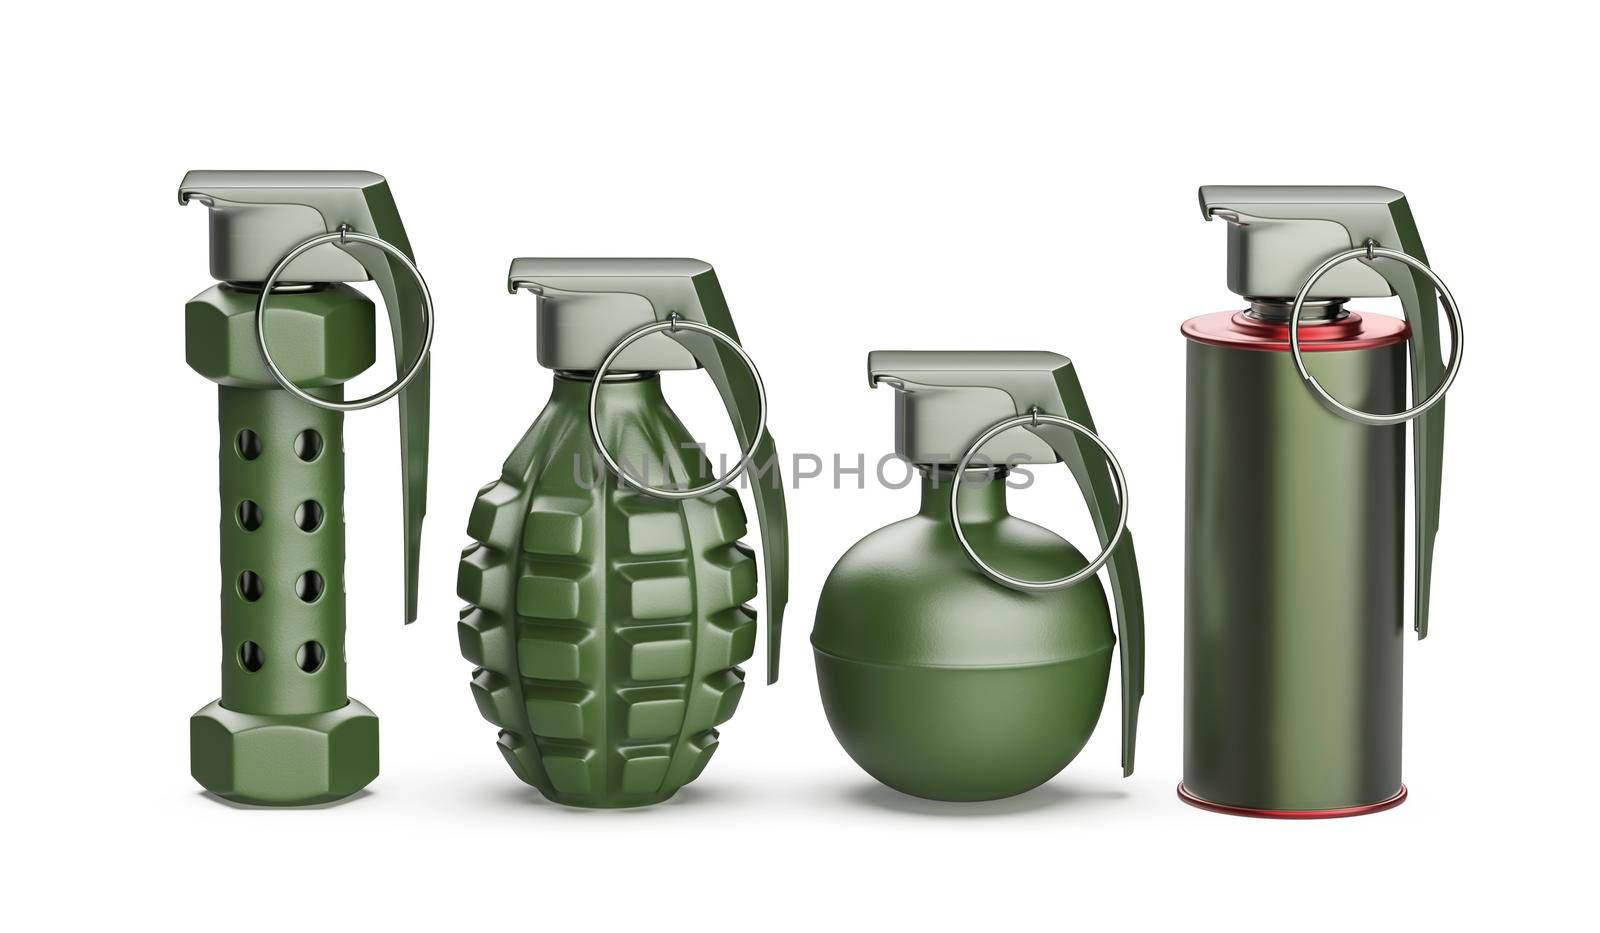 Different hand grenades by magraphics